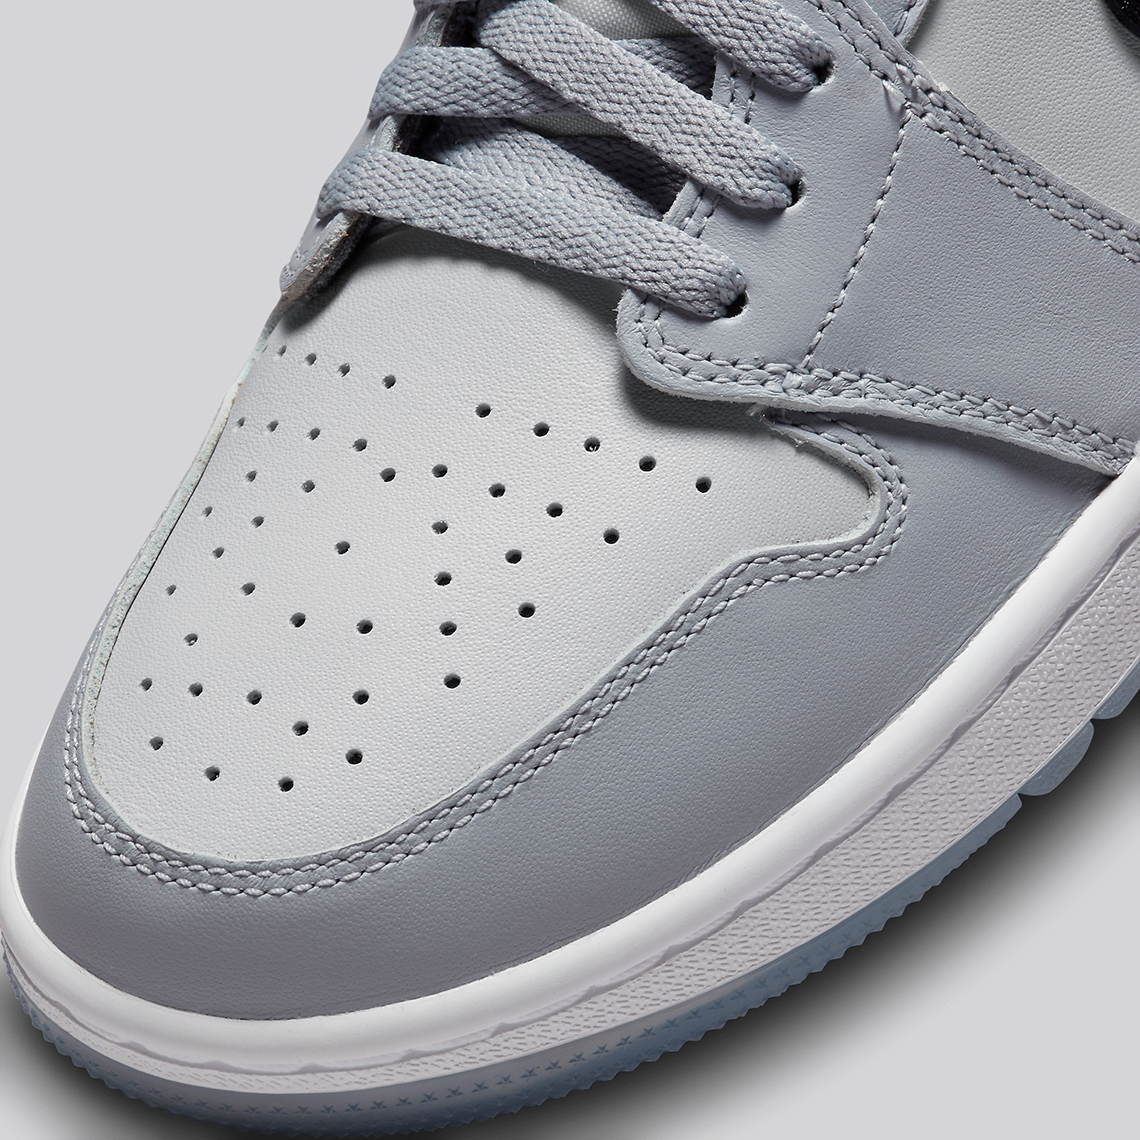 The Air jordan High 1 Elevate Low "Atmosphere" is a brand new women's Golf Wolf Grey Dd9315 002 6